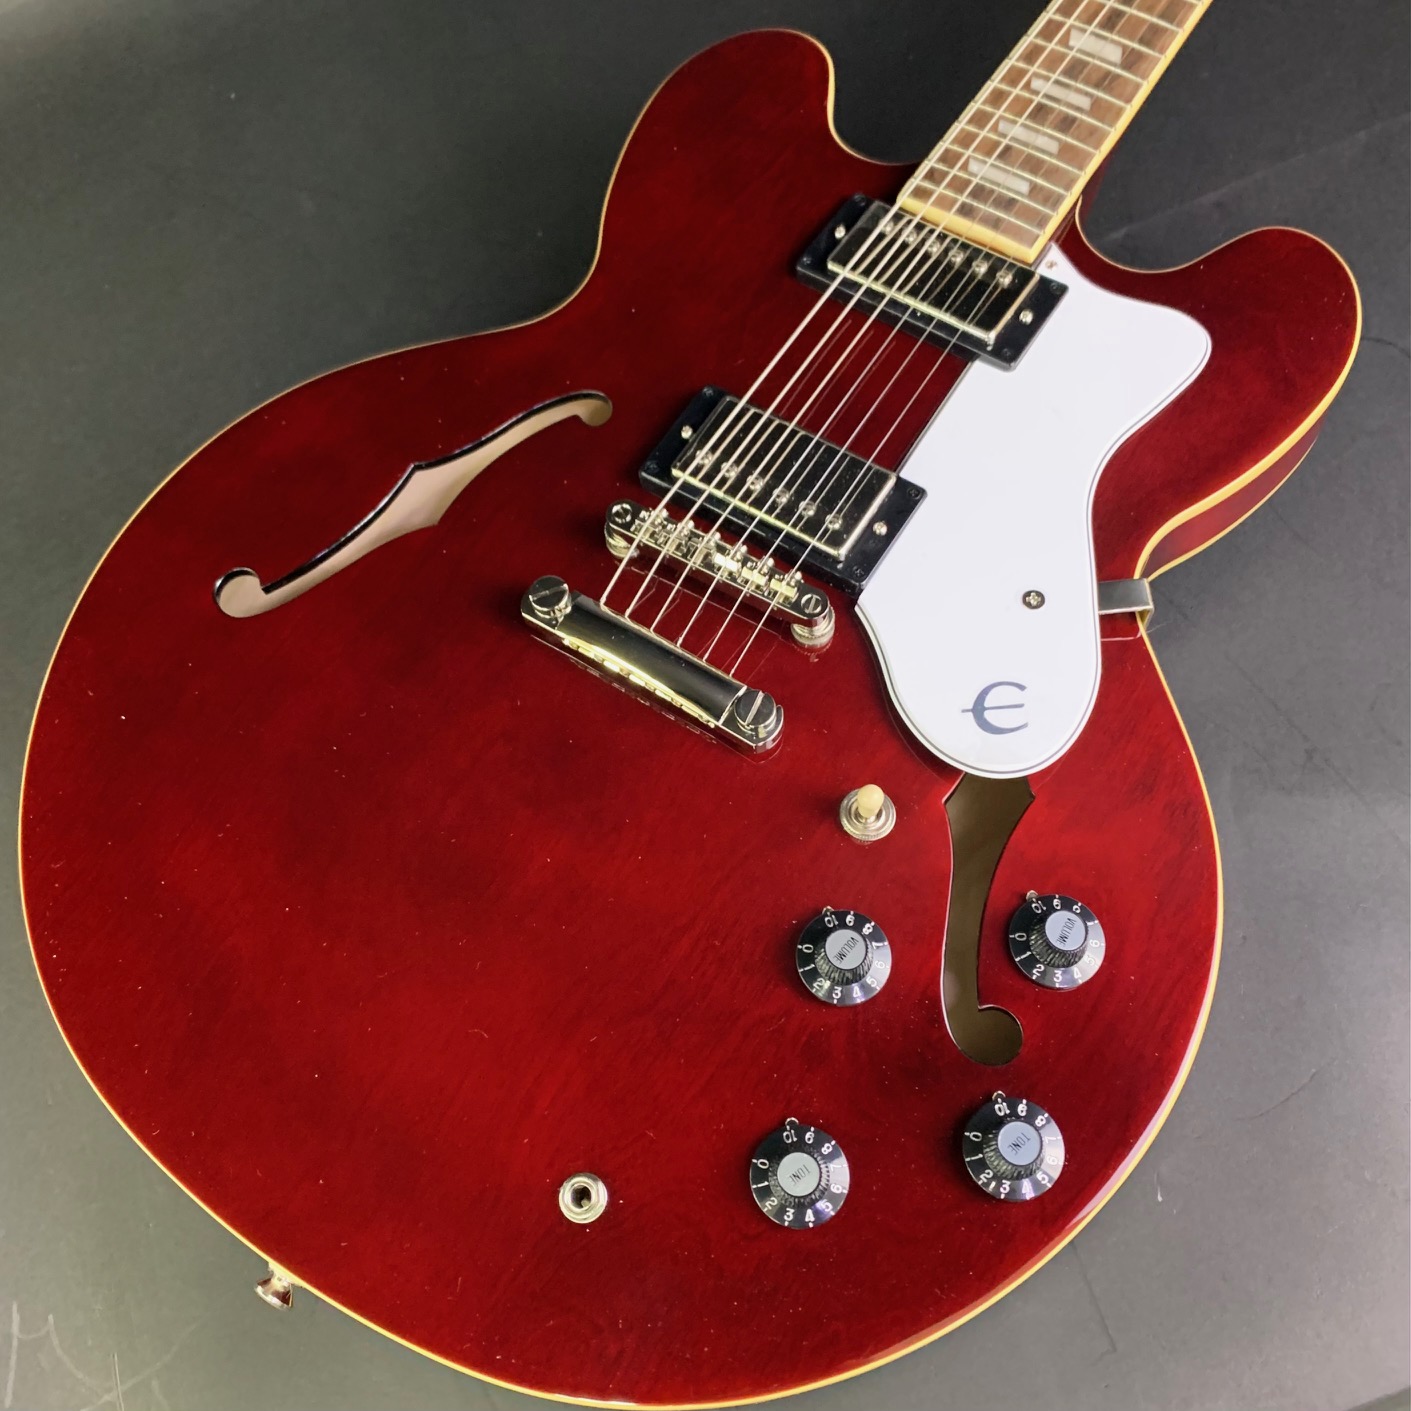 Epiphone  Noel Gallagher Riviera【現物画像】 エピフォン 【 久留米ゆめタウン店 】